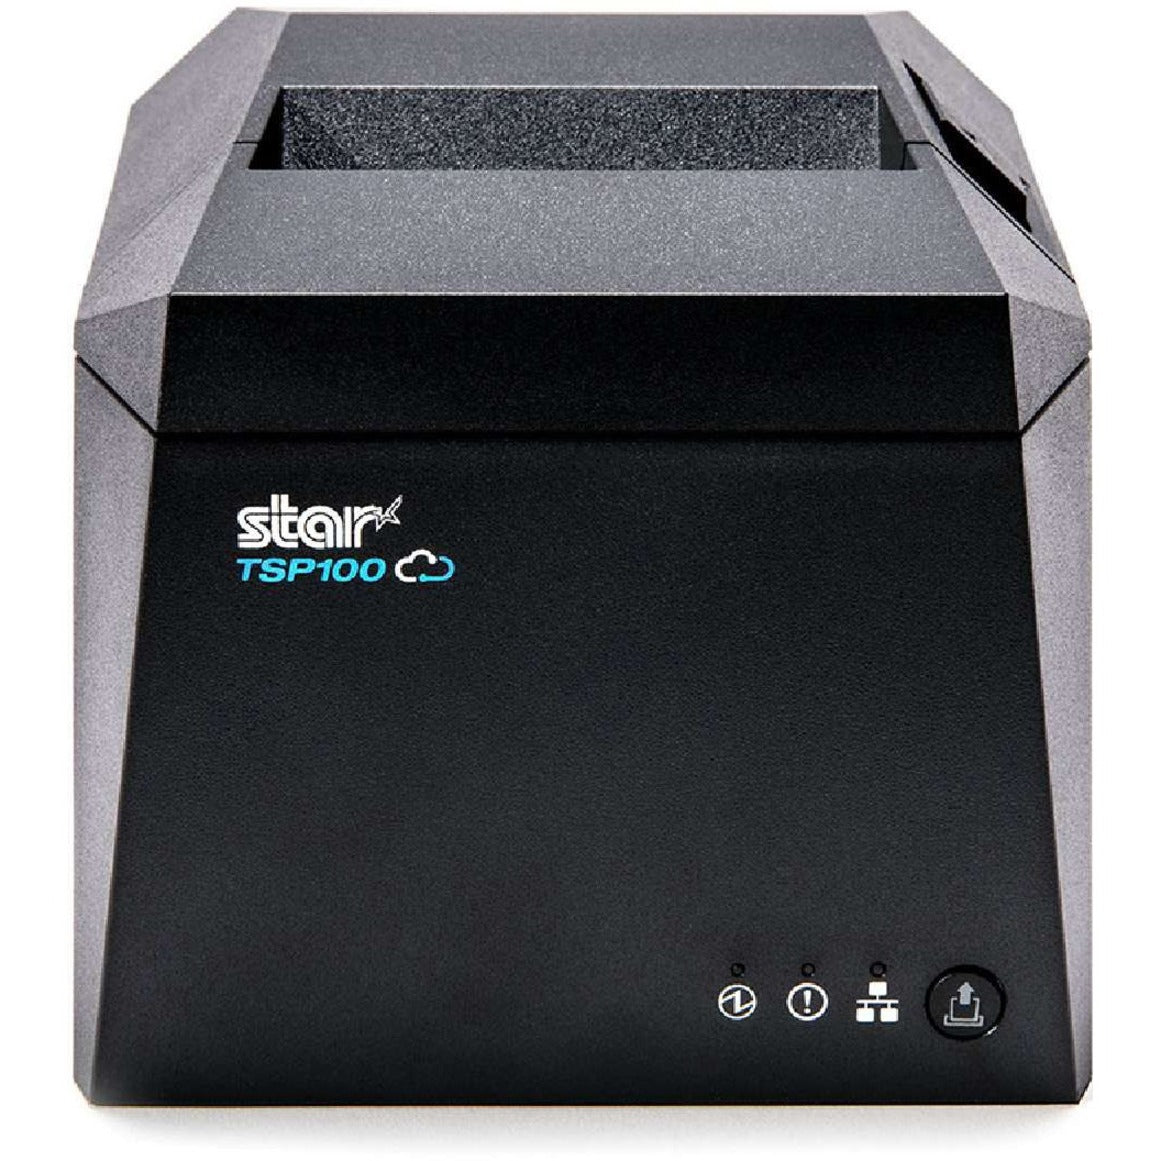 Star Micronics 39473010 TSP143IVUE GRY US Thermal Receipt Printer, Auto-cutter, Compact, Monochrome, Wired